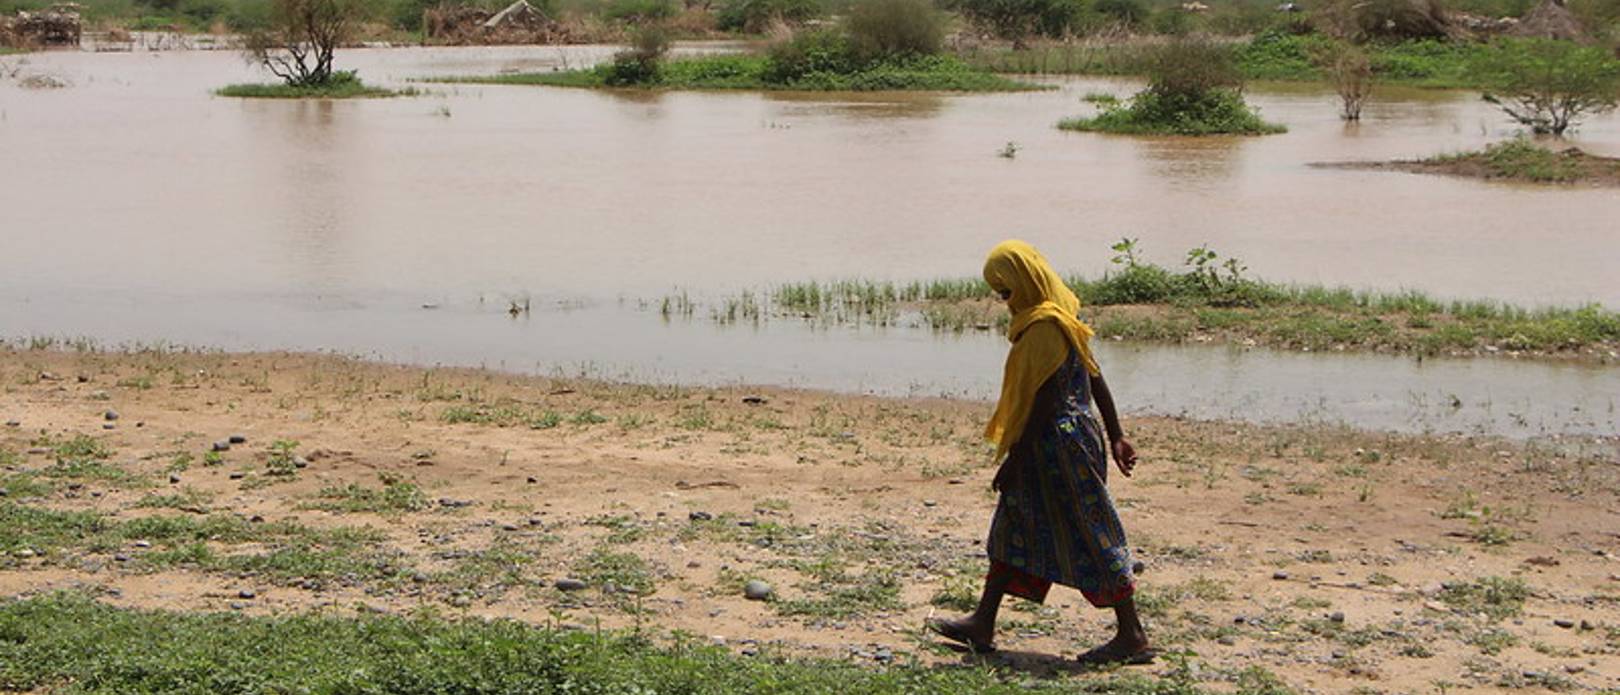 Young Sudanese girl walking along shallow river with dried shrubs and trees in the horizon.